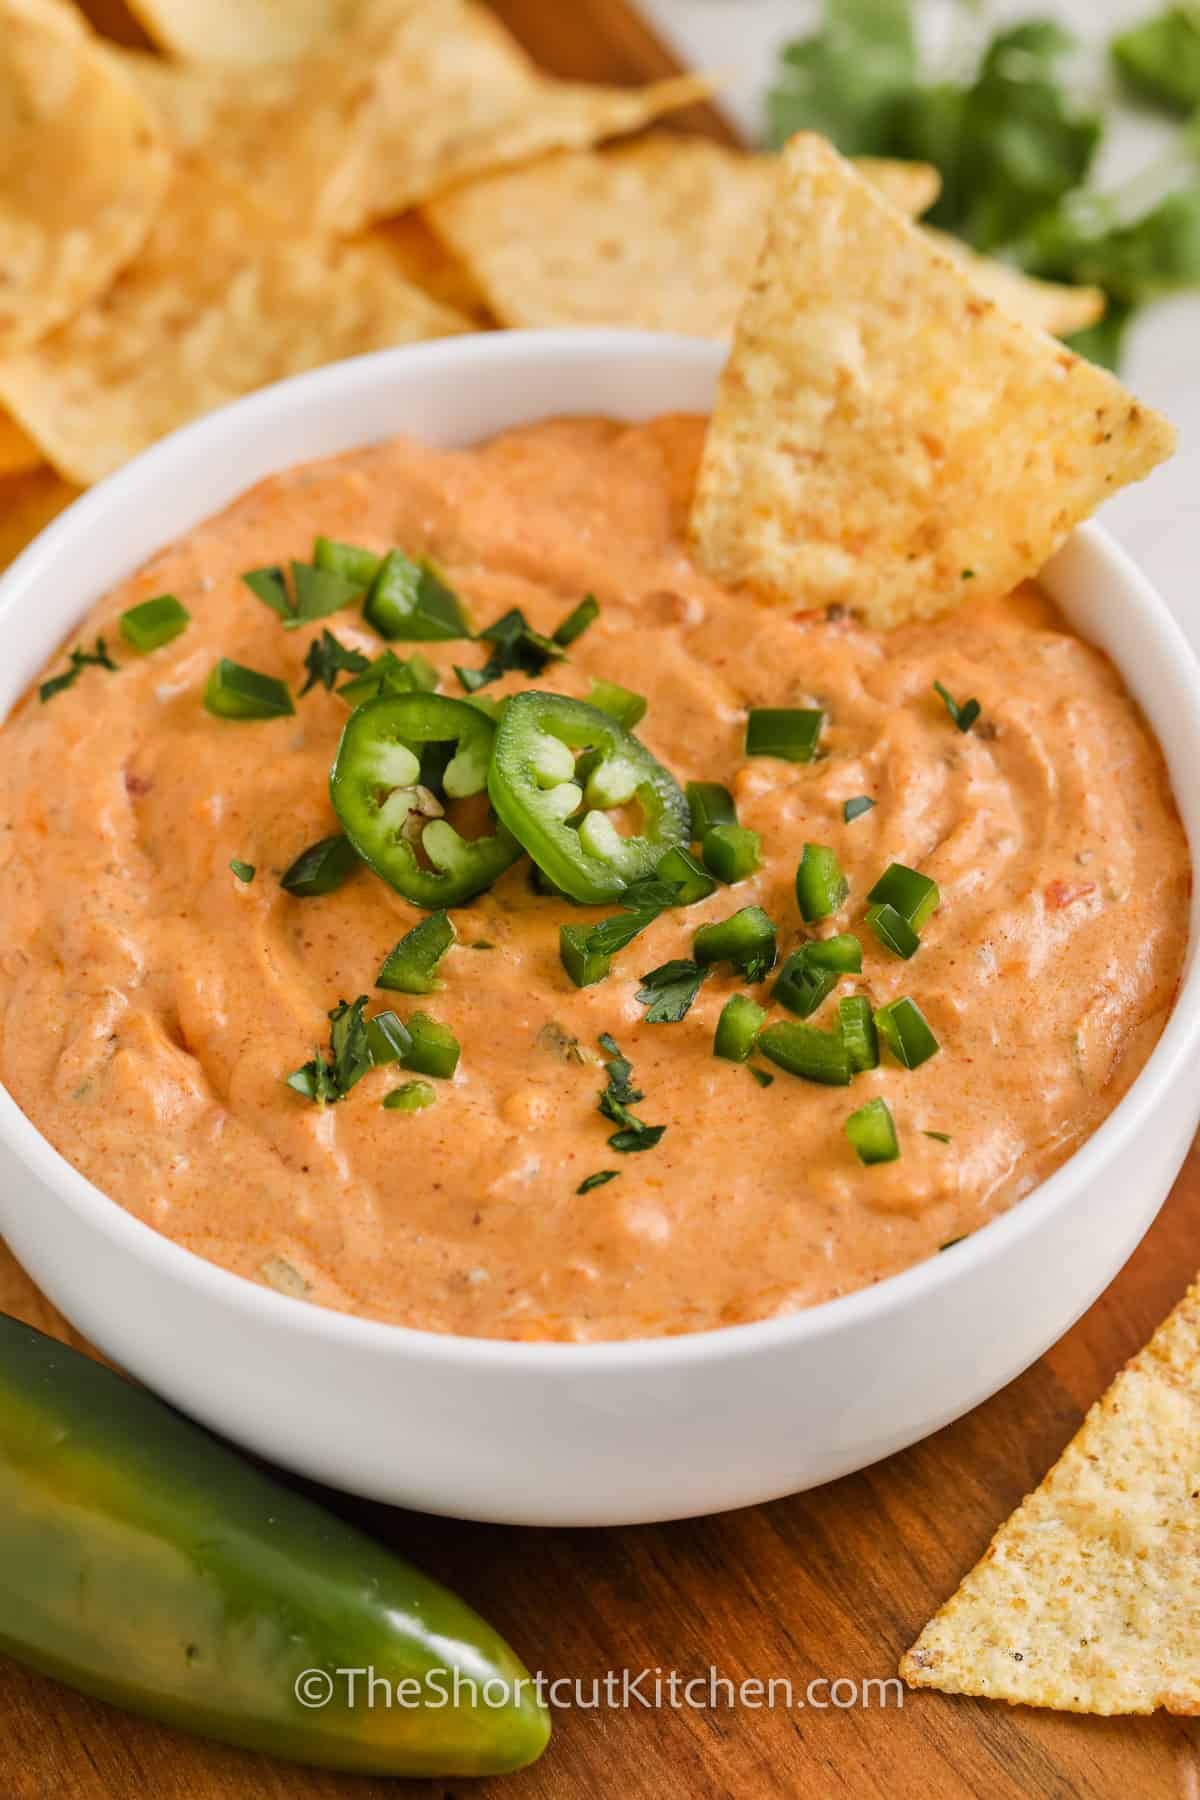 dish of Chili Cheese Dip Recipe with tortilla chips